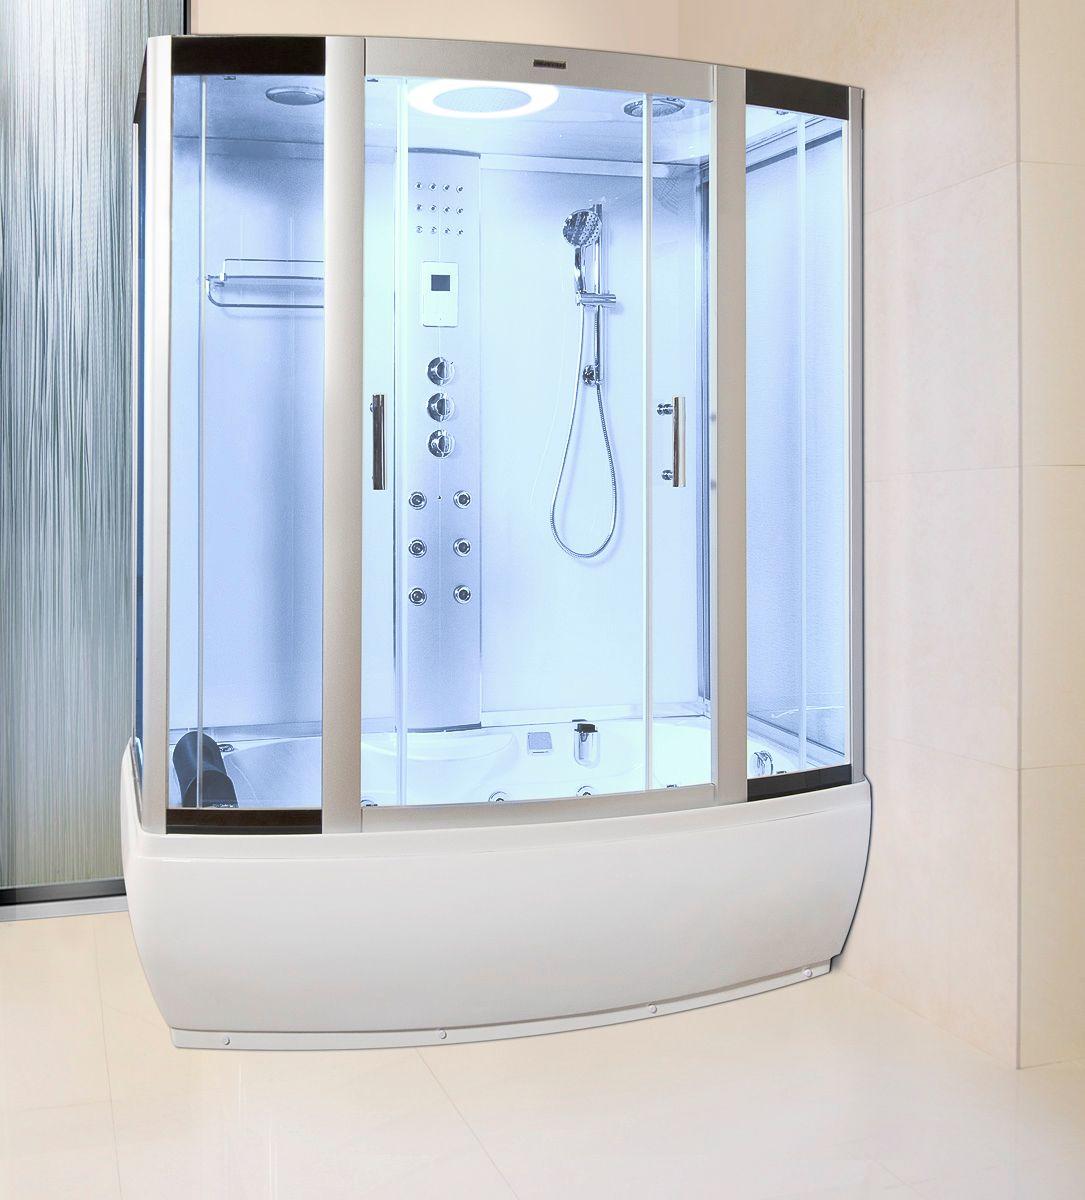 Lisna Waters LWW3 1700mm x 900mm Steam Shower Cabin Whirlpool and Airspa  Bath - White